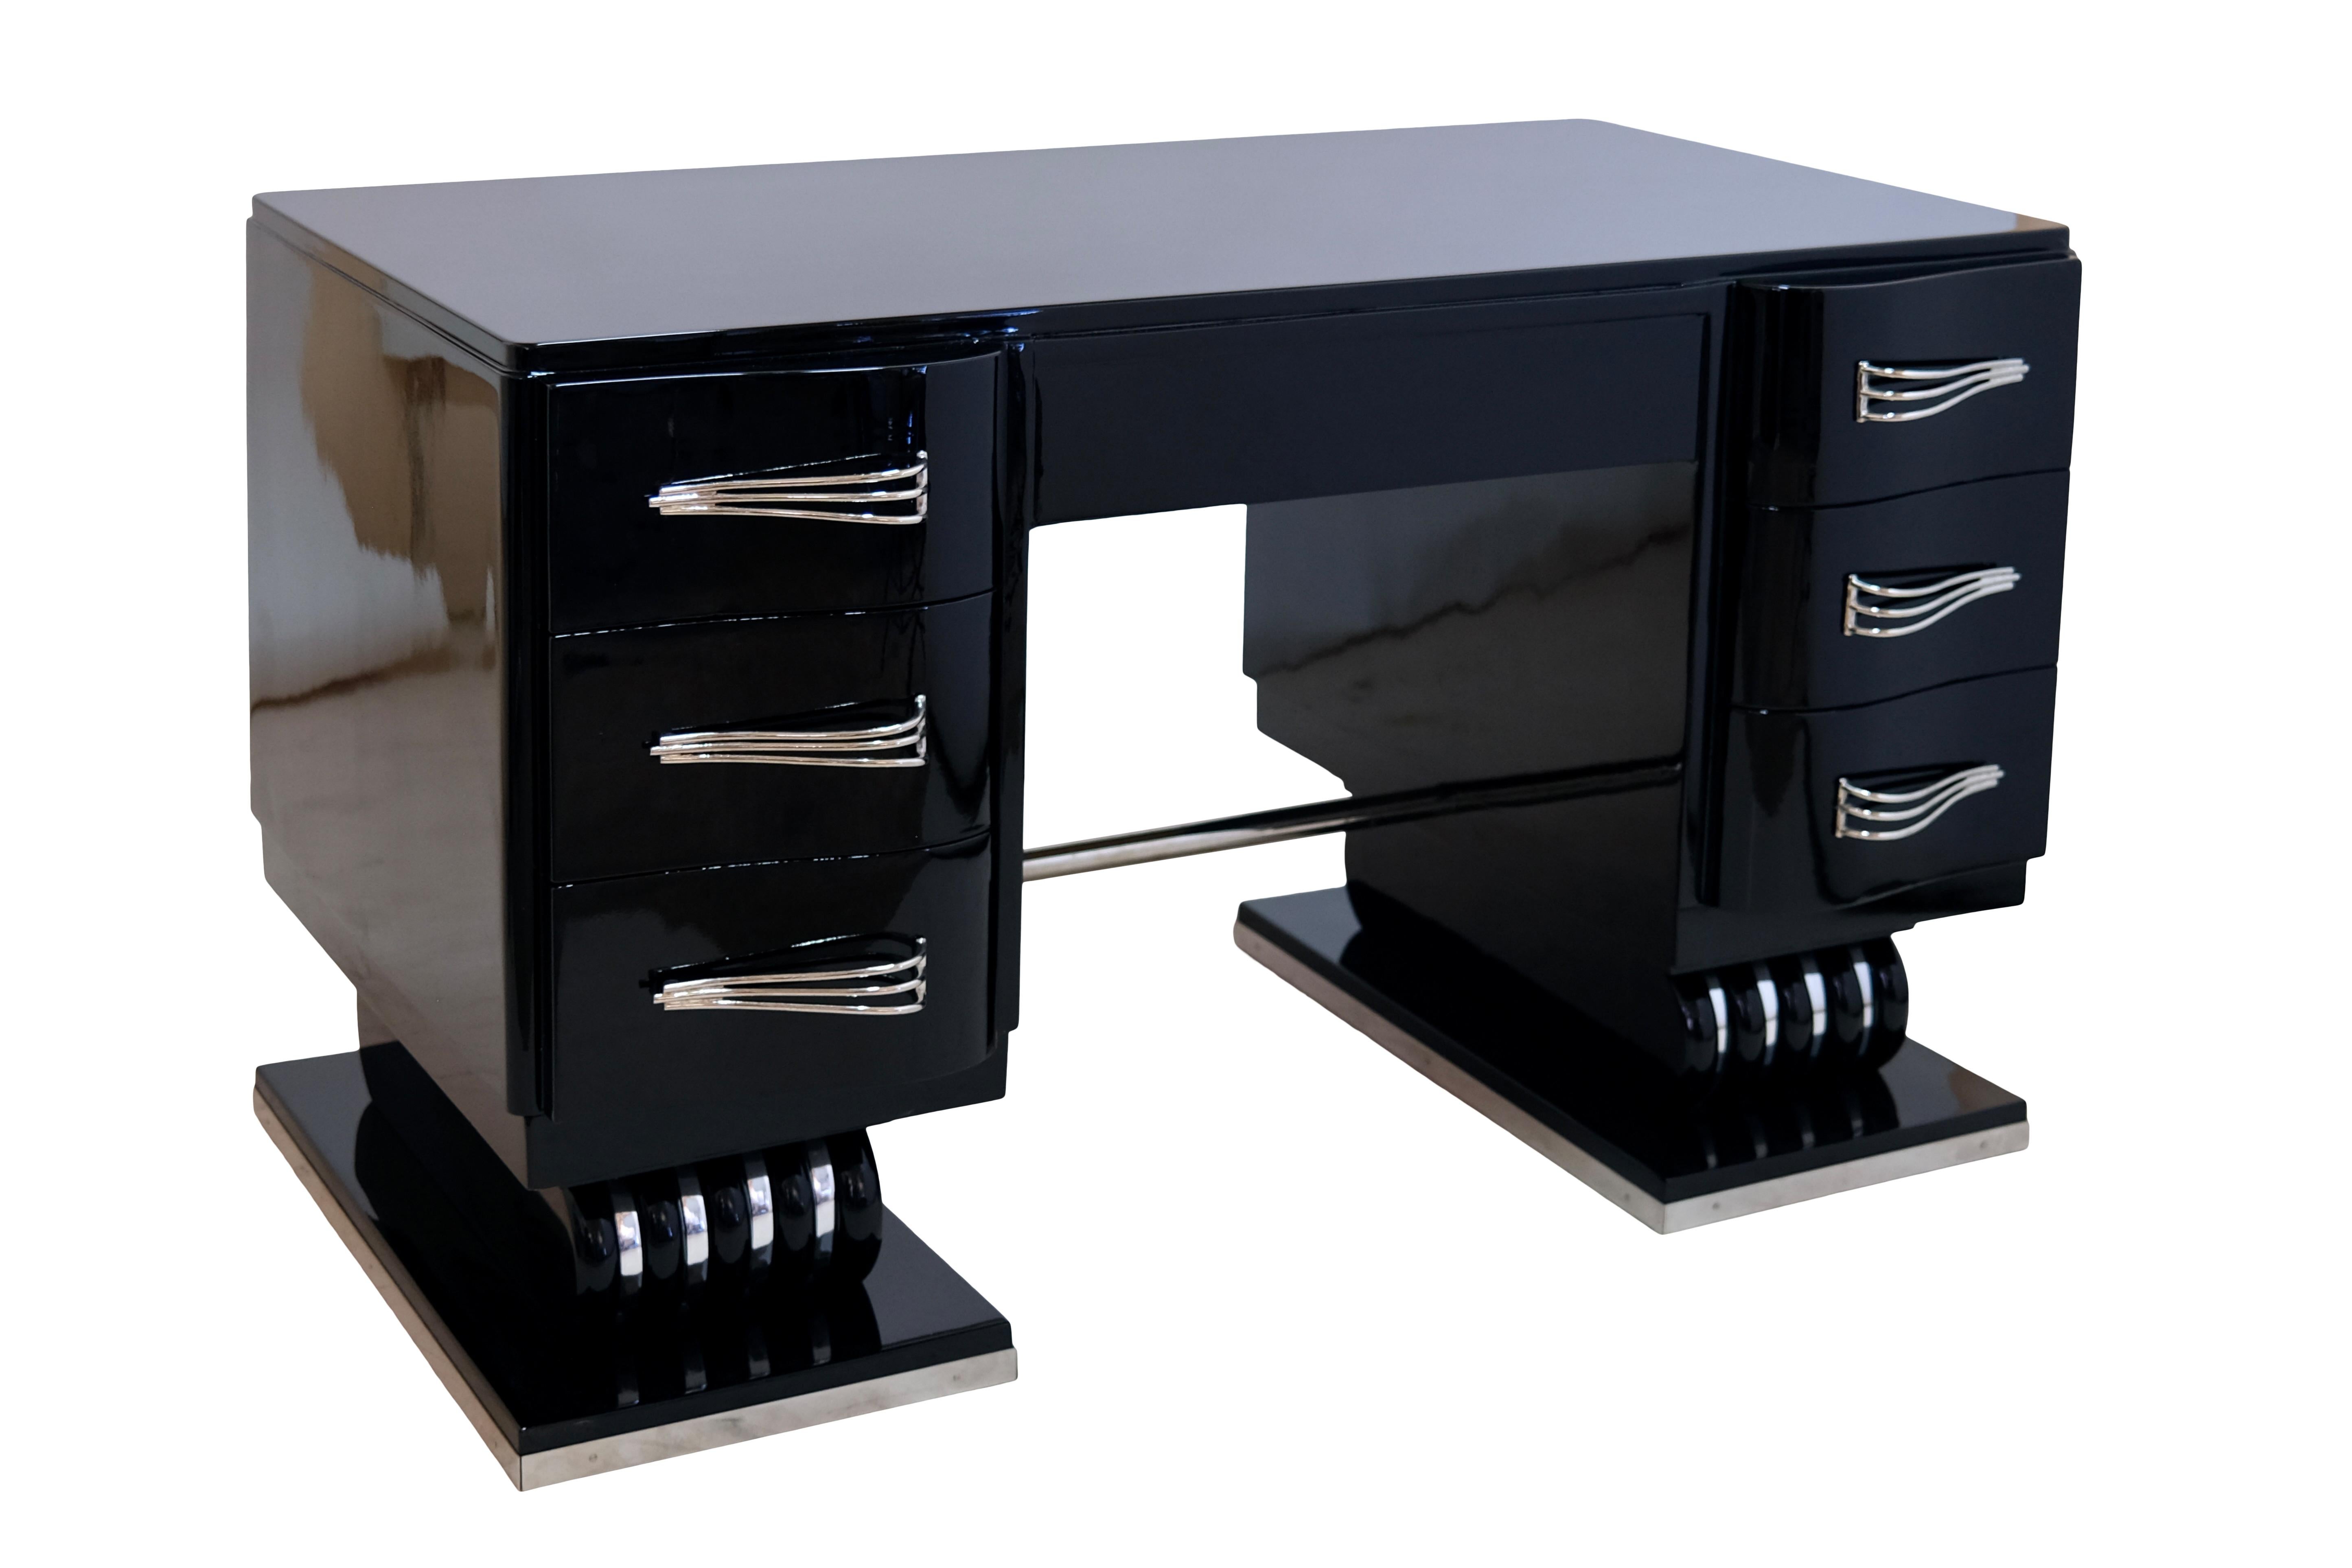 1930s French Art Deco Desk in Black Lacquer with Nickeled Metal Applications For Sale 3